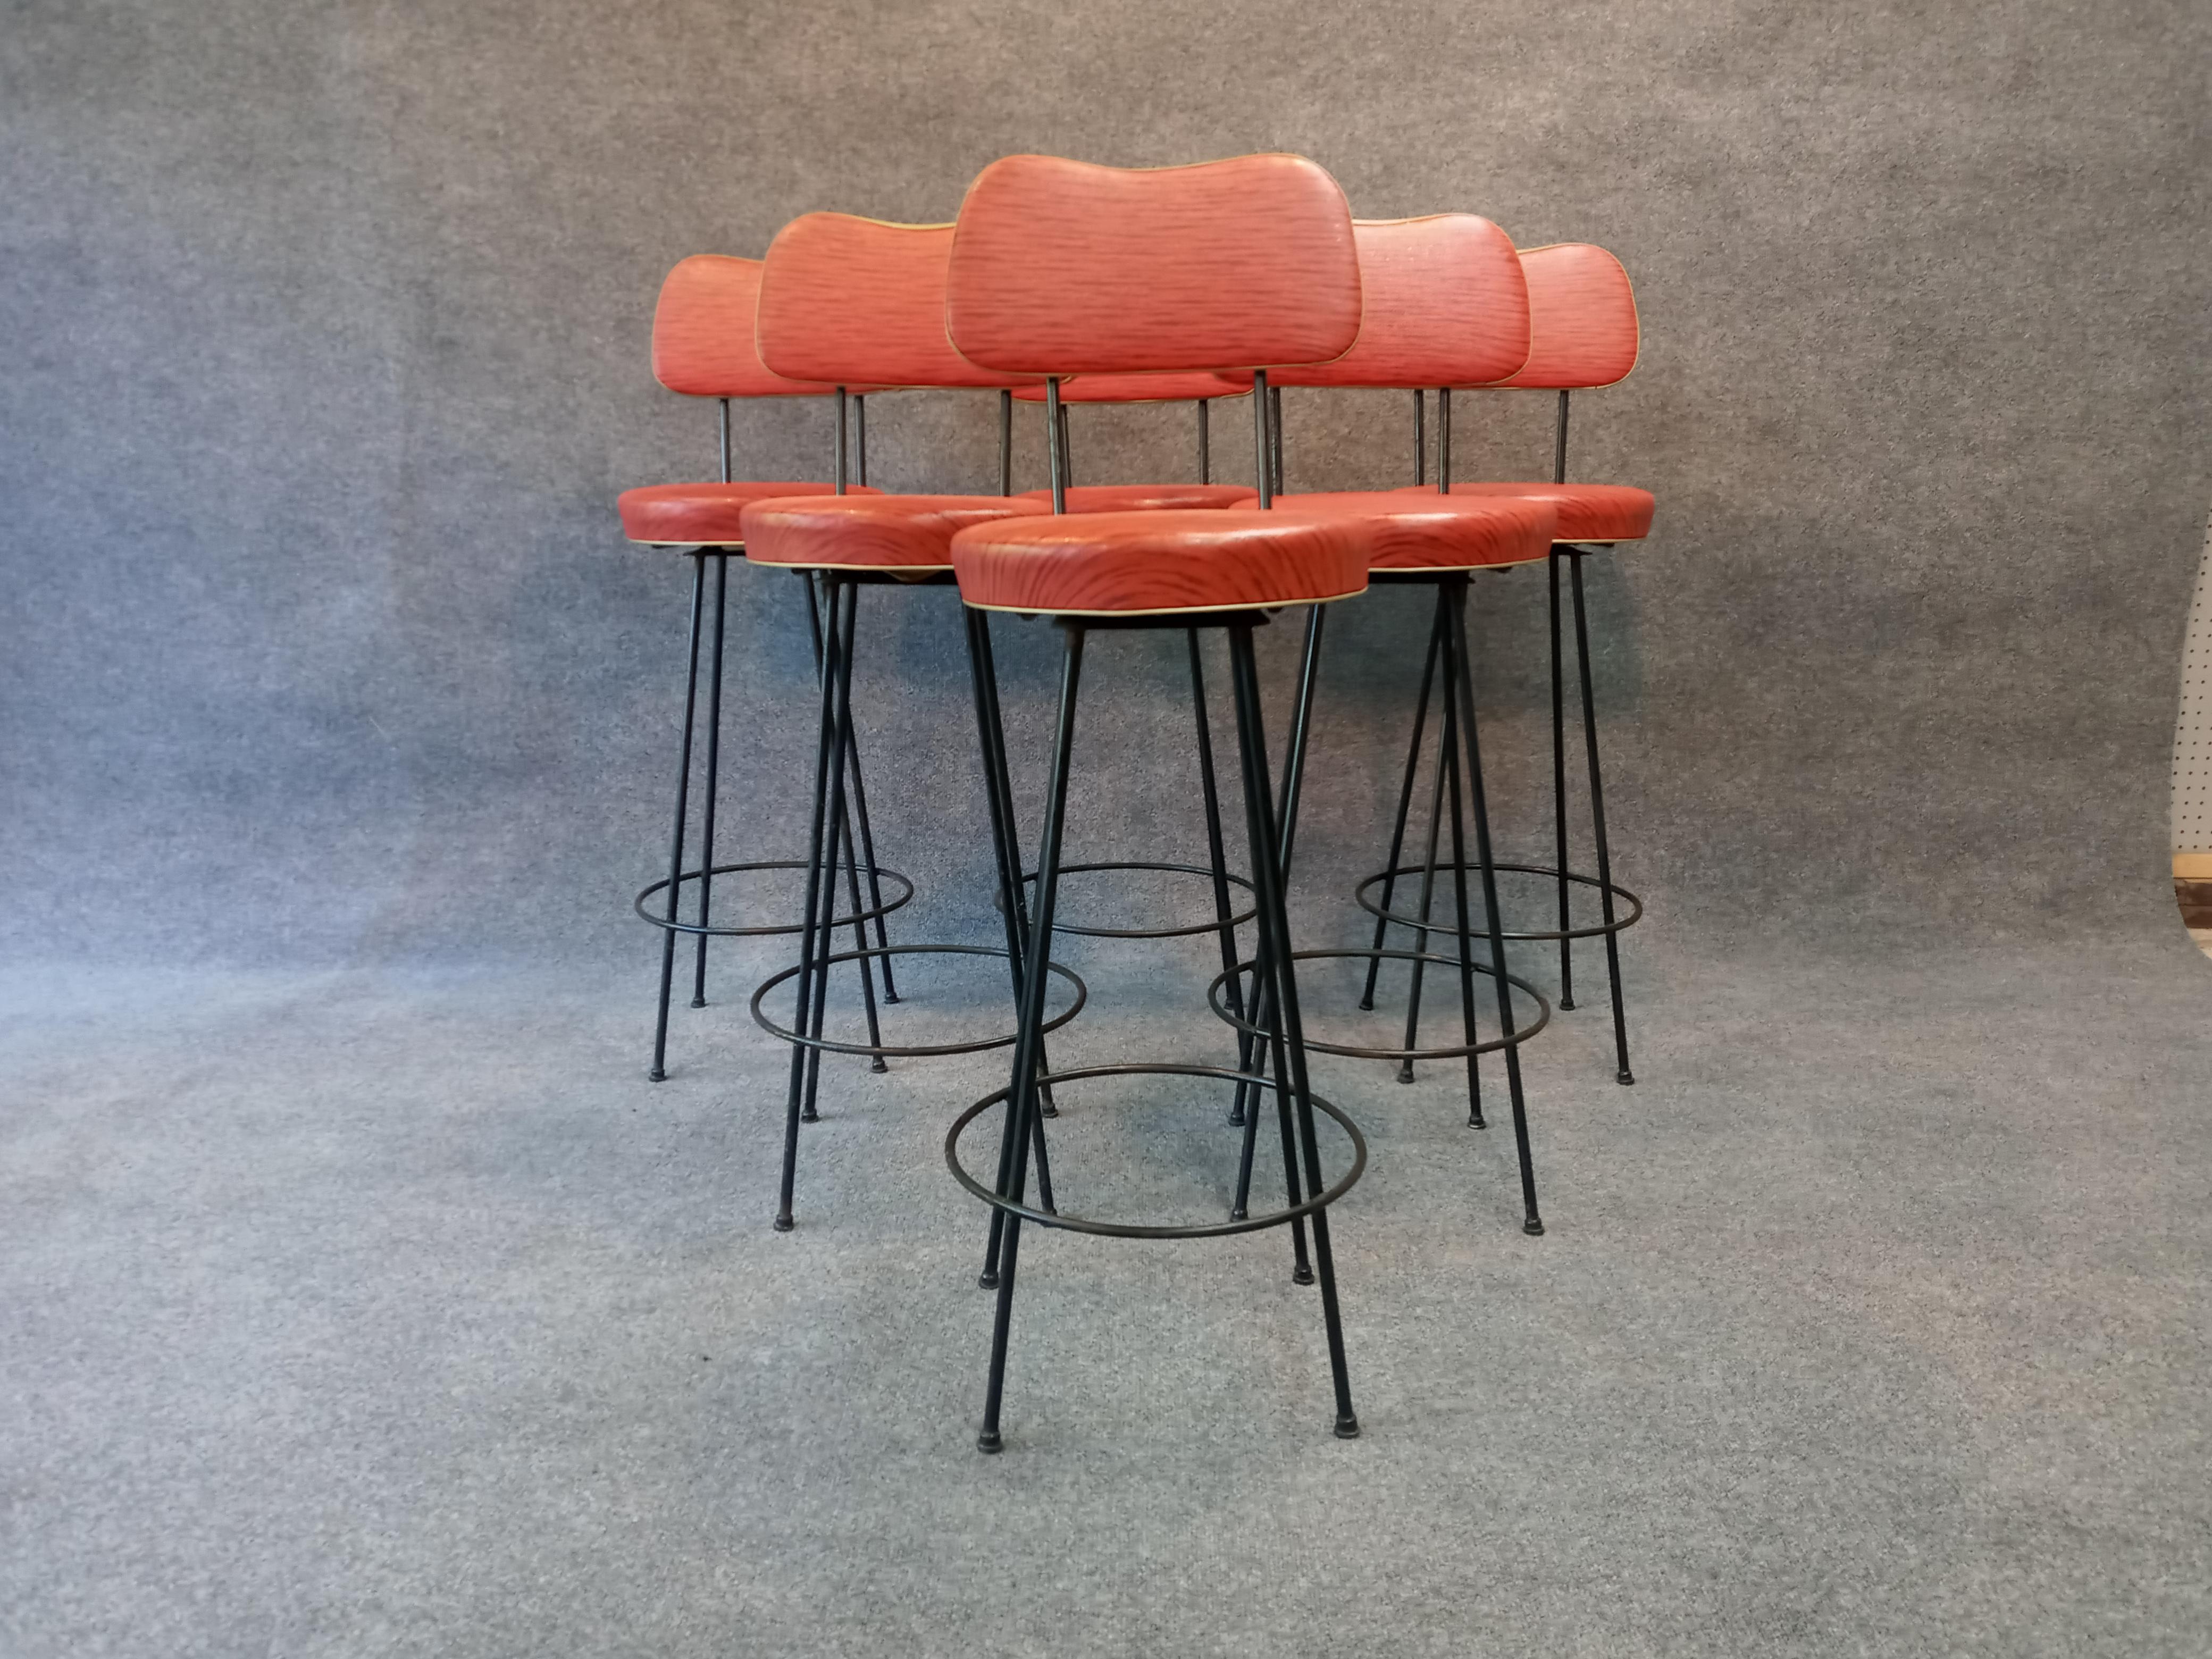 An amazing time capsule clean original set of swivel barstools retaining original finishes. Each retains original enamel on iron bases, black plastic feet, original red with black striping vinyl upholstery with gold piping.